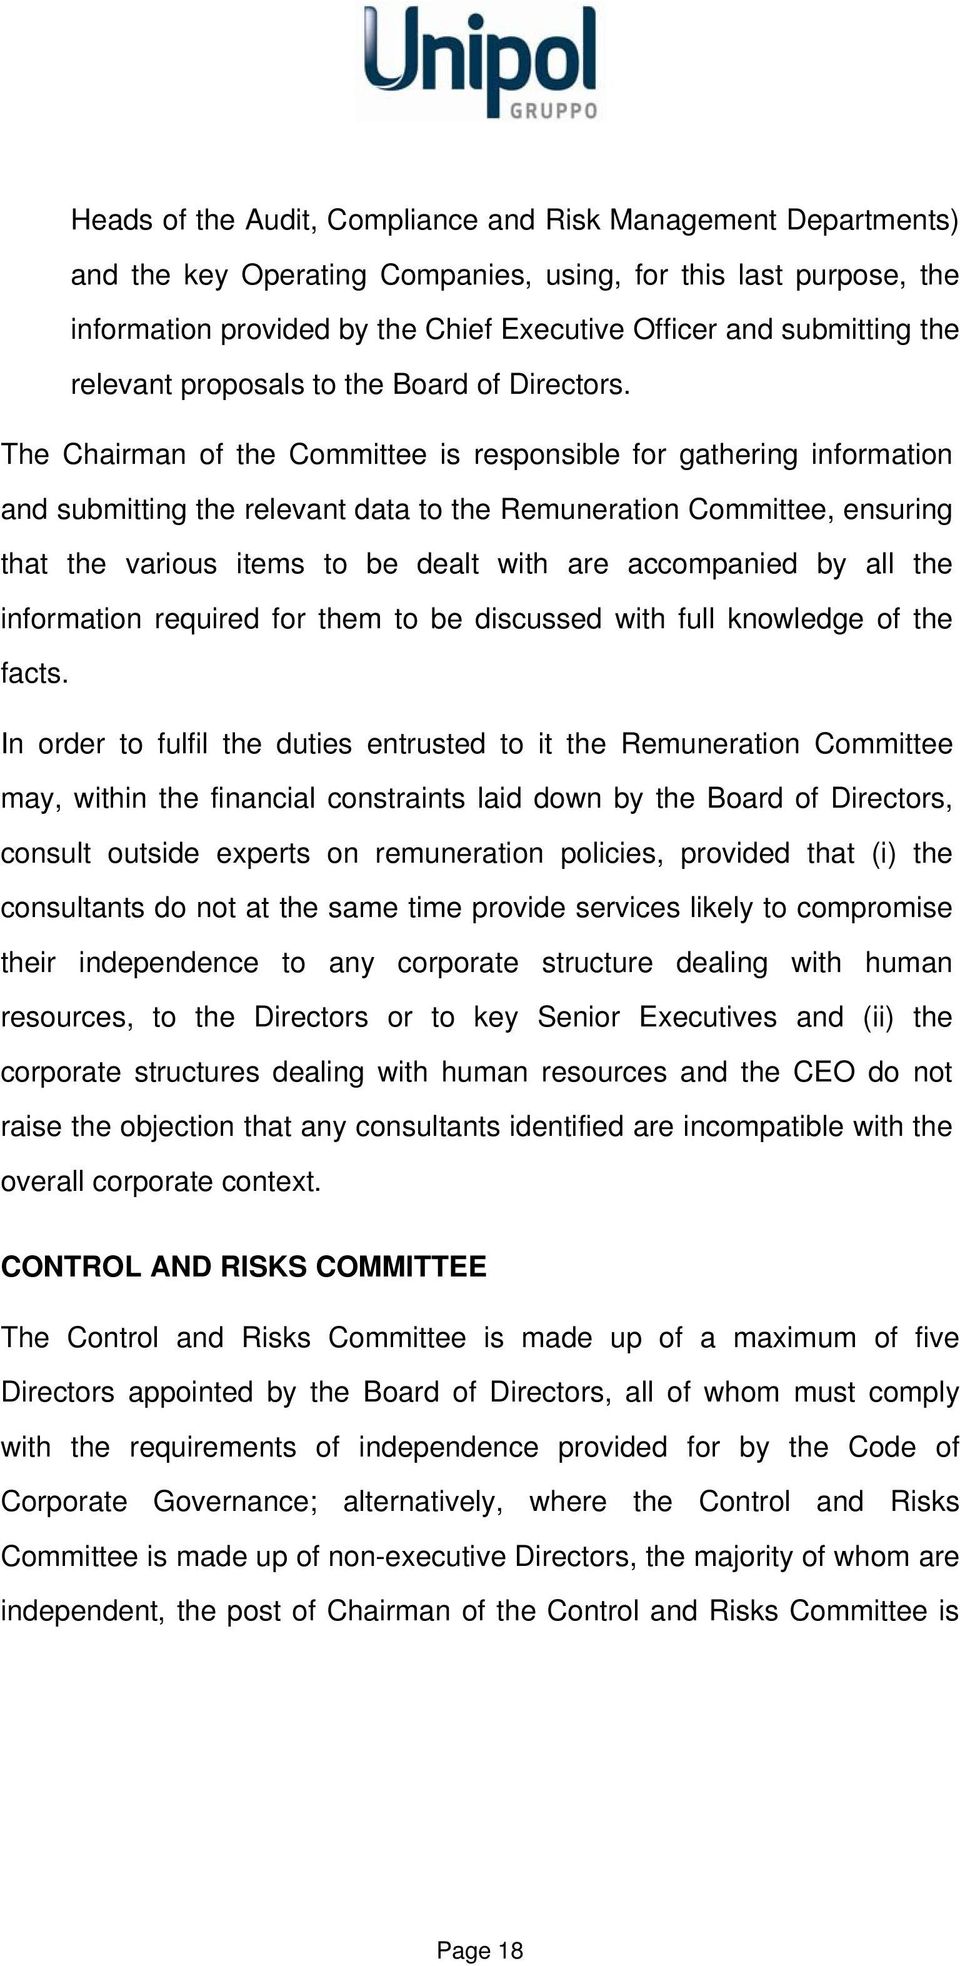 The Chairman of the Committee is responsible for gathering information and submitting the relevant data to the Remuneration Committee, ensuring that the various items to be dealt with are accompanied